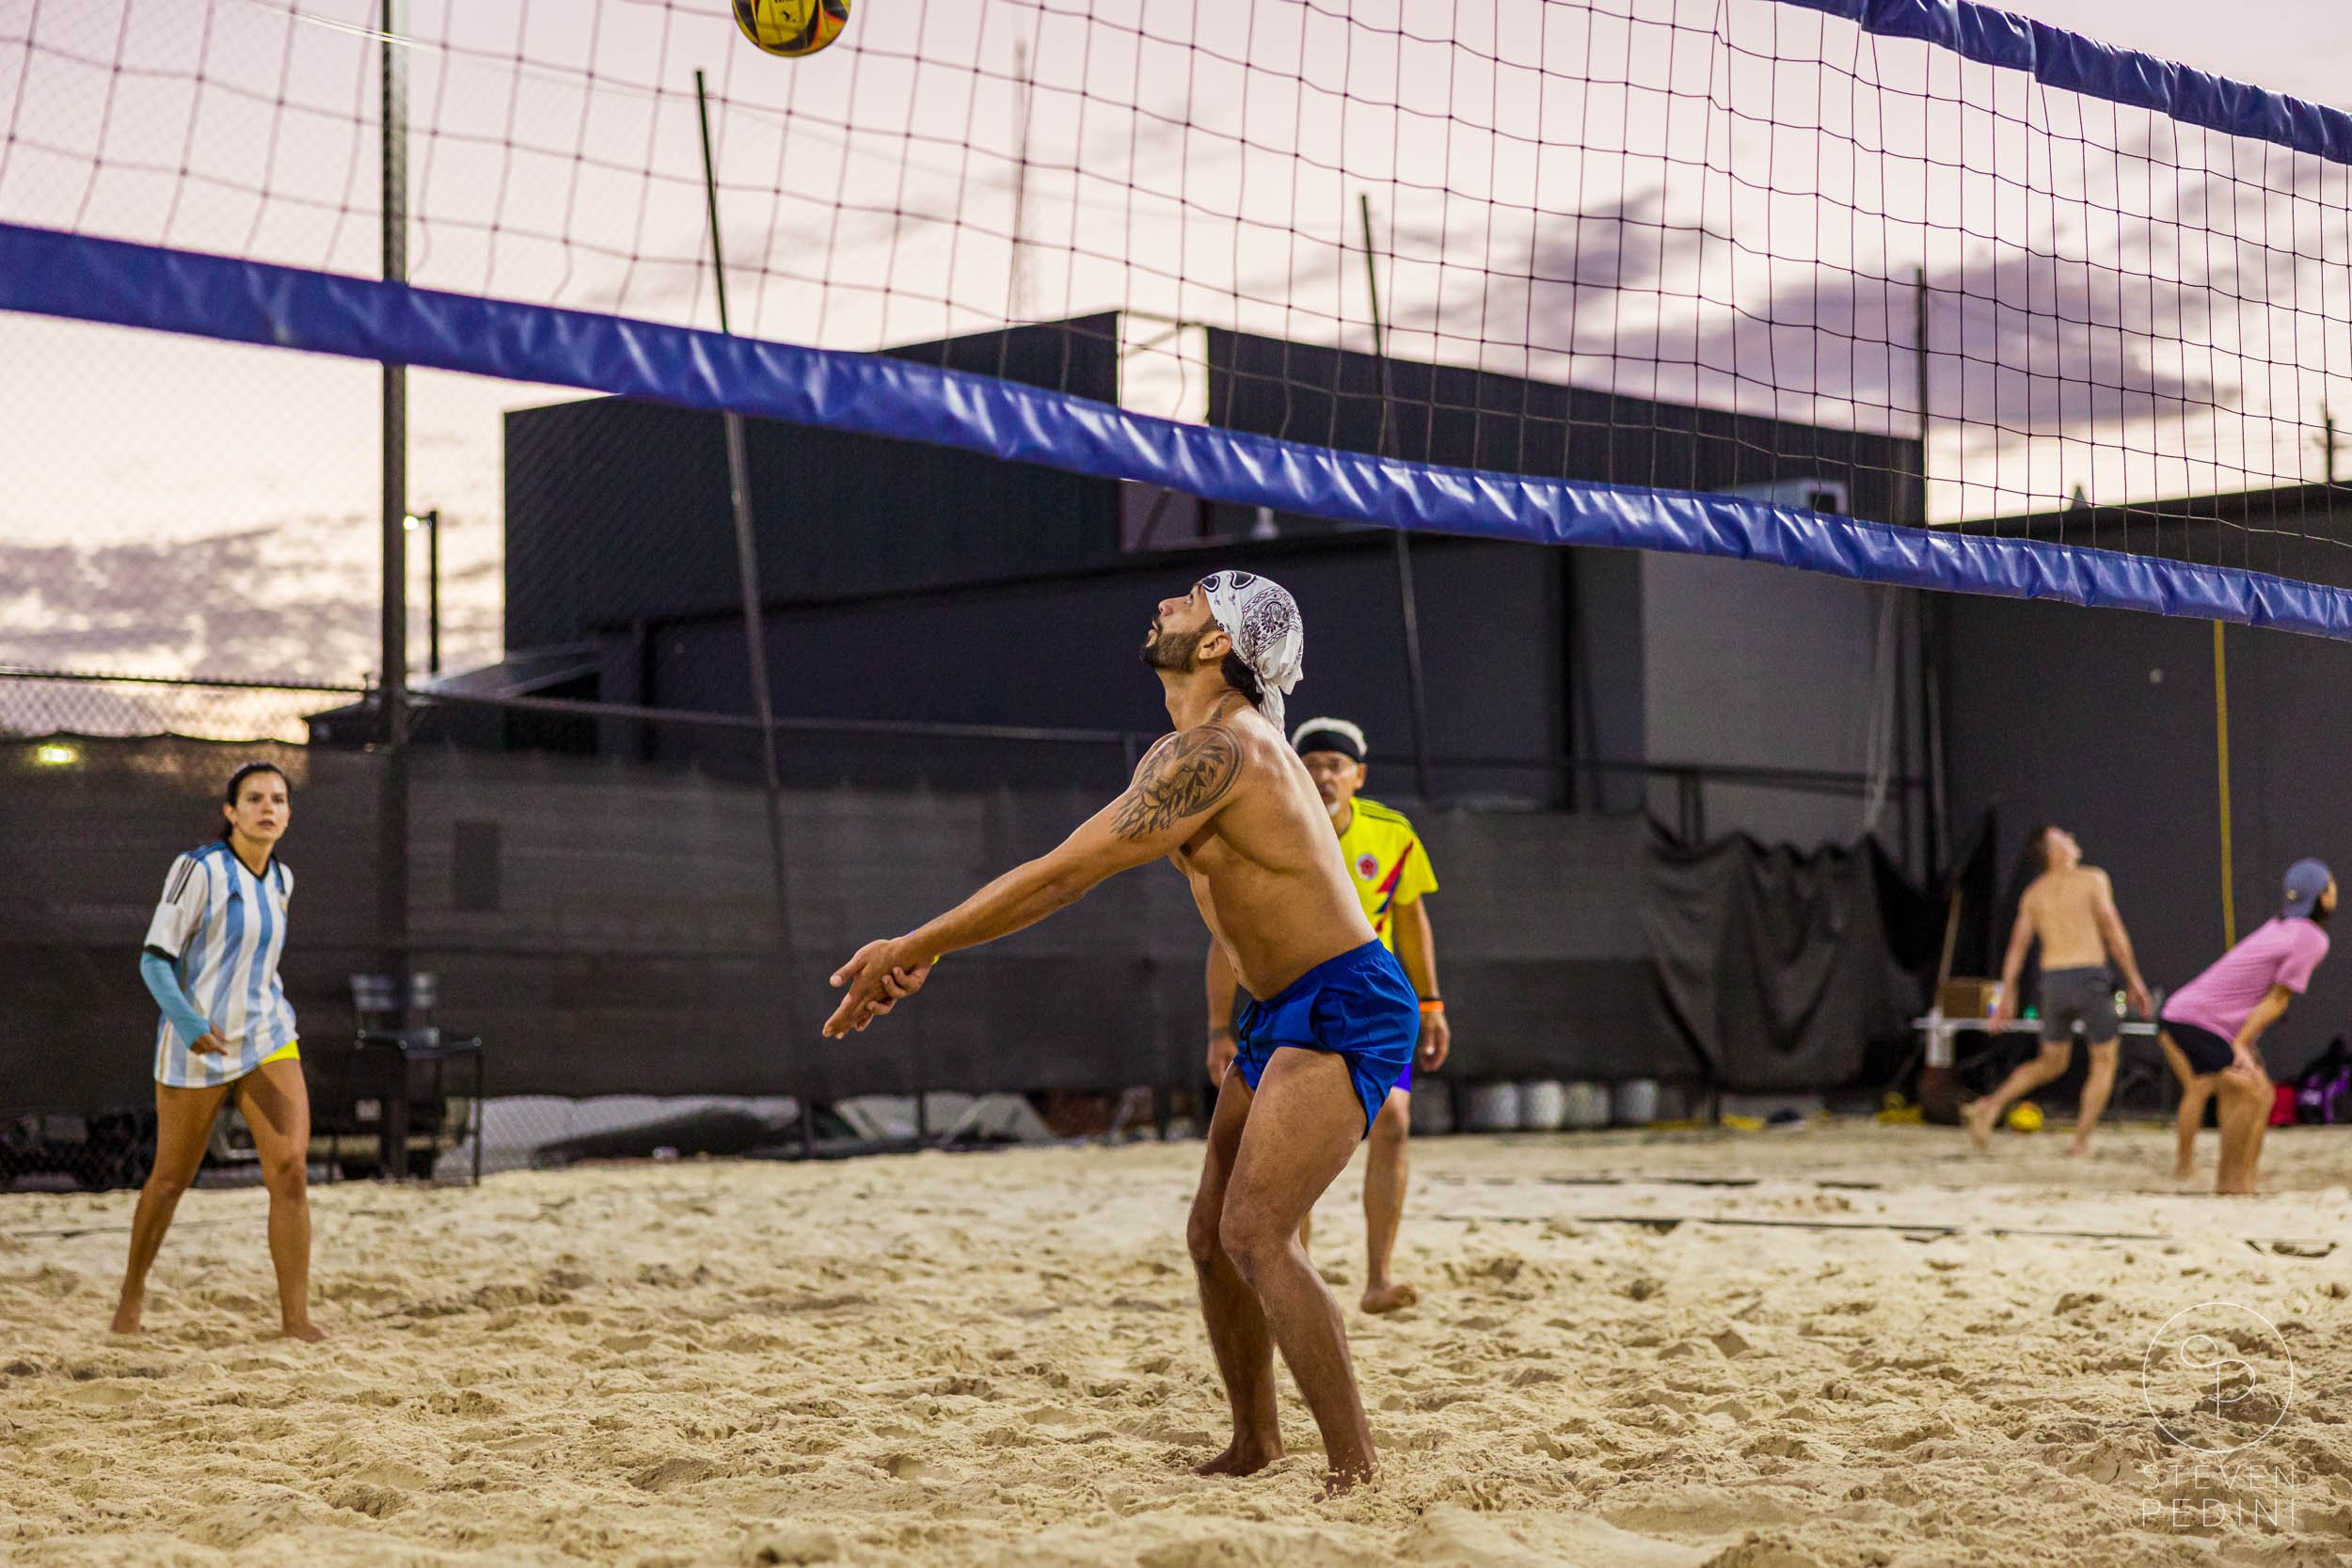 Steven Pedini Photography - Bumpy Pickle - Sand Volleyball - Houston TX - World Cup of Volleyball - 00303.jpg